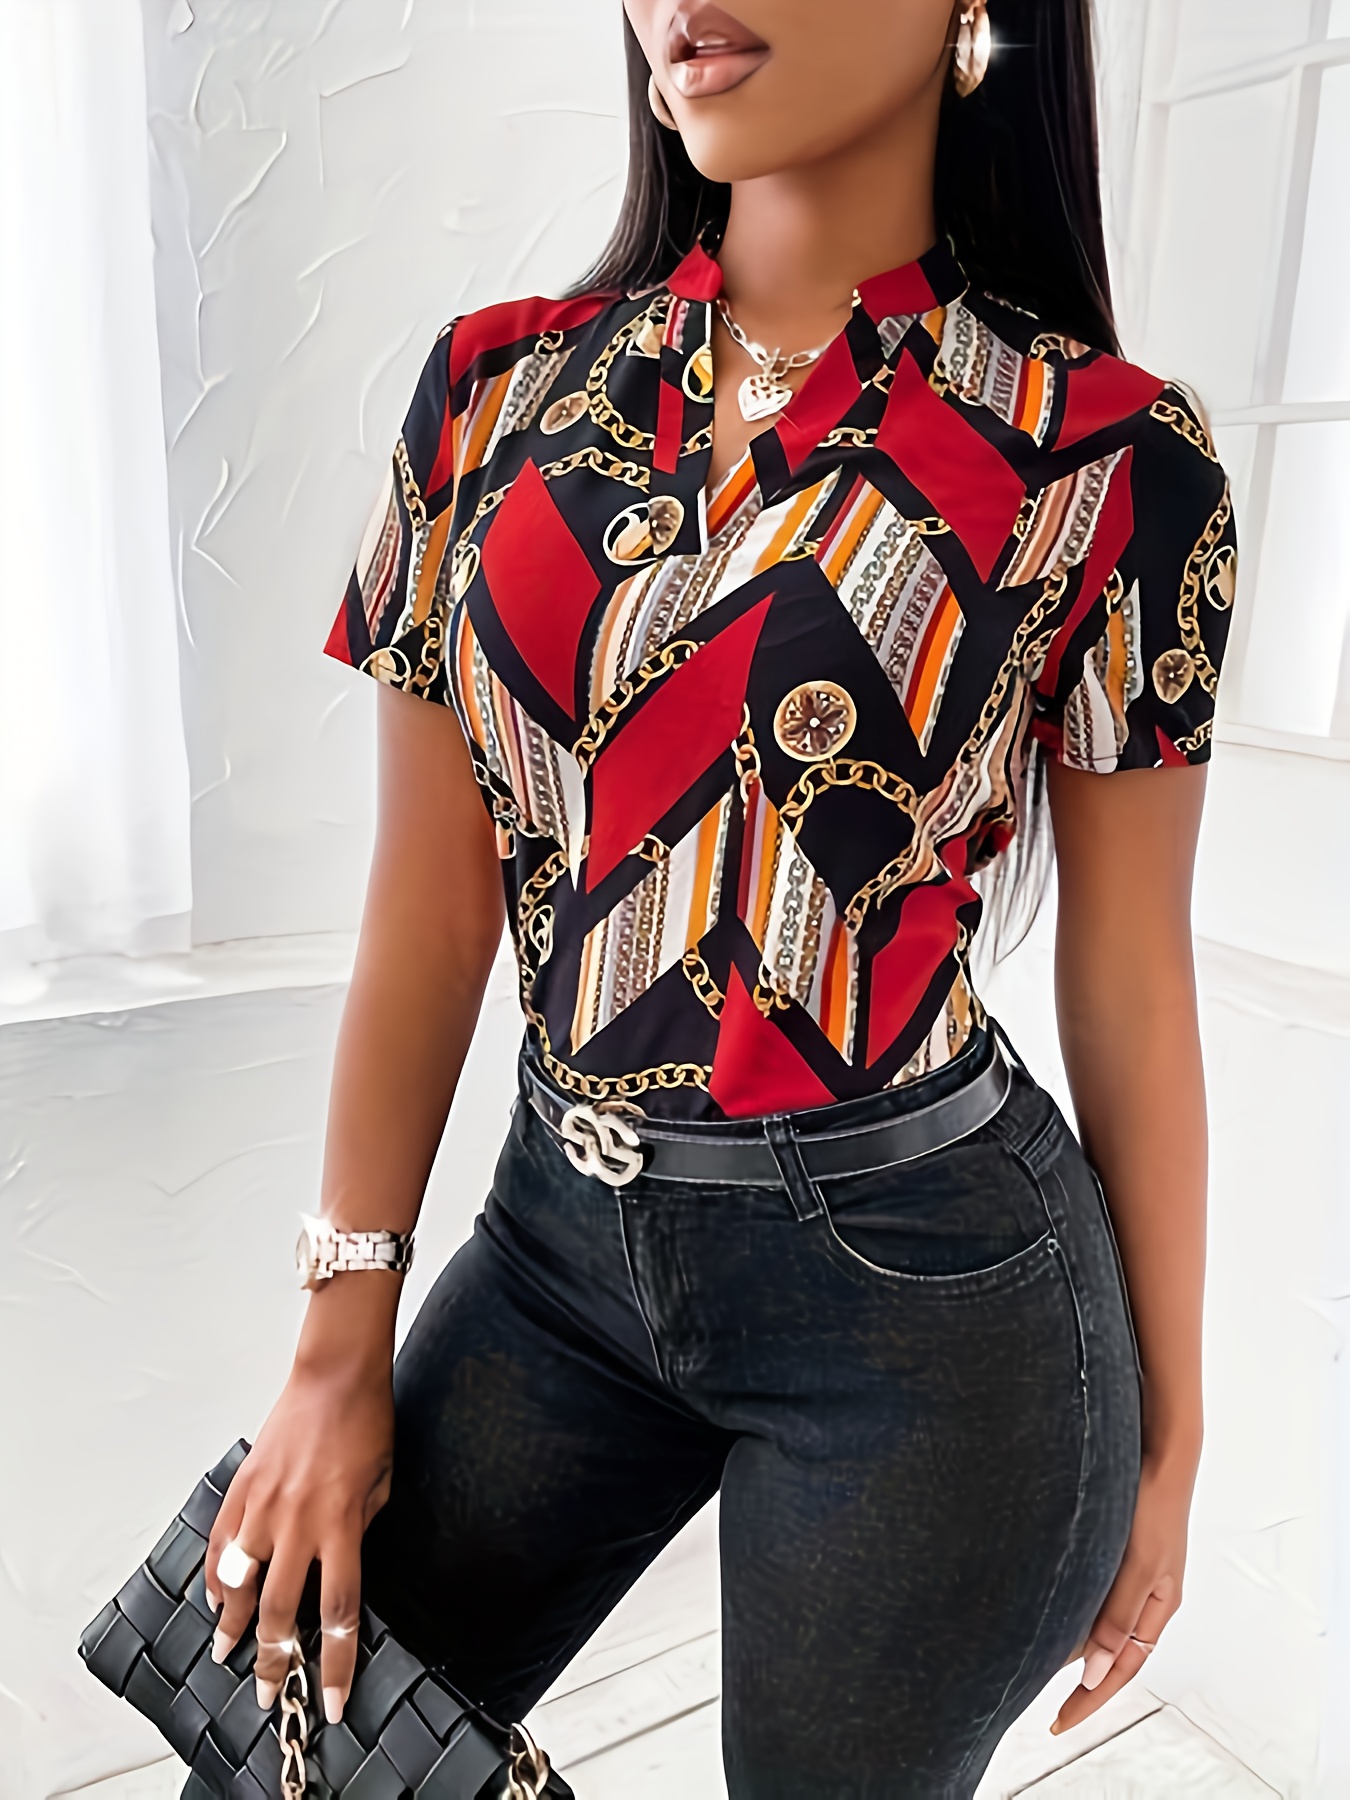 Women's Tops - Shirts, Blouses + Tees - Suzanne Grae